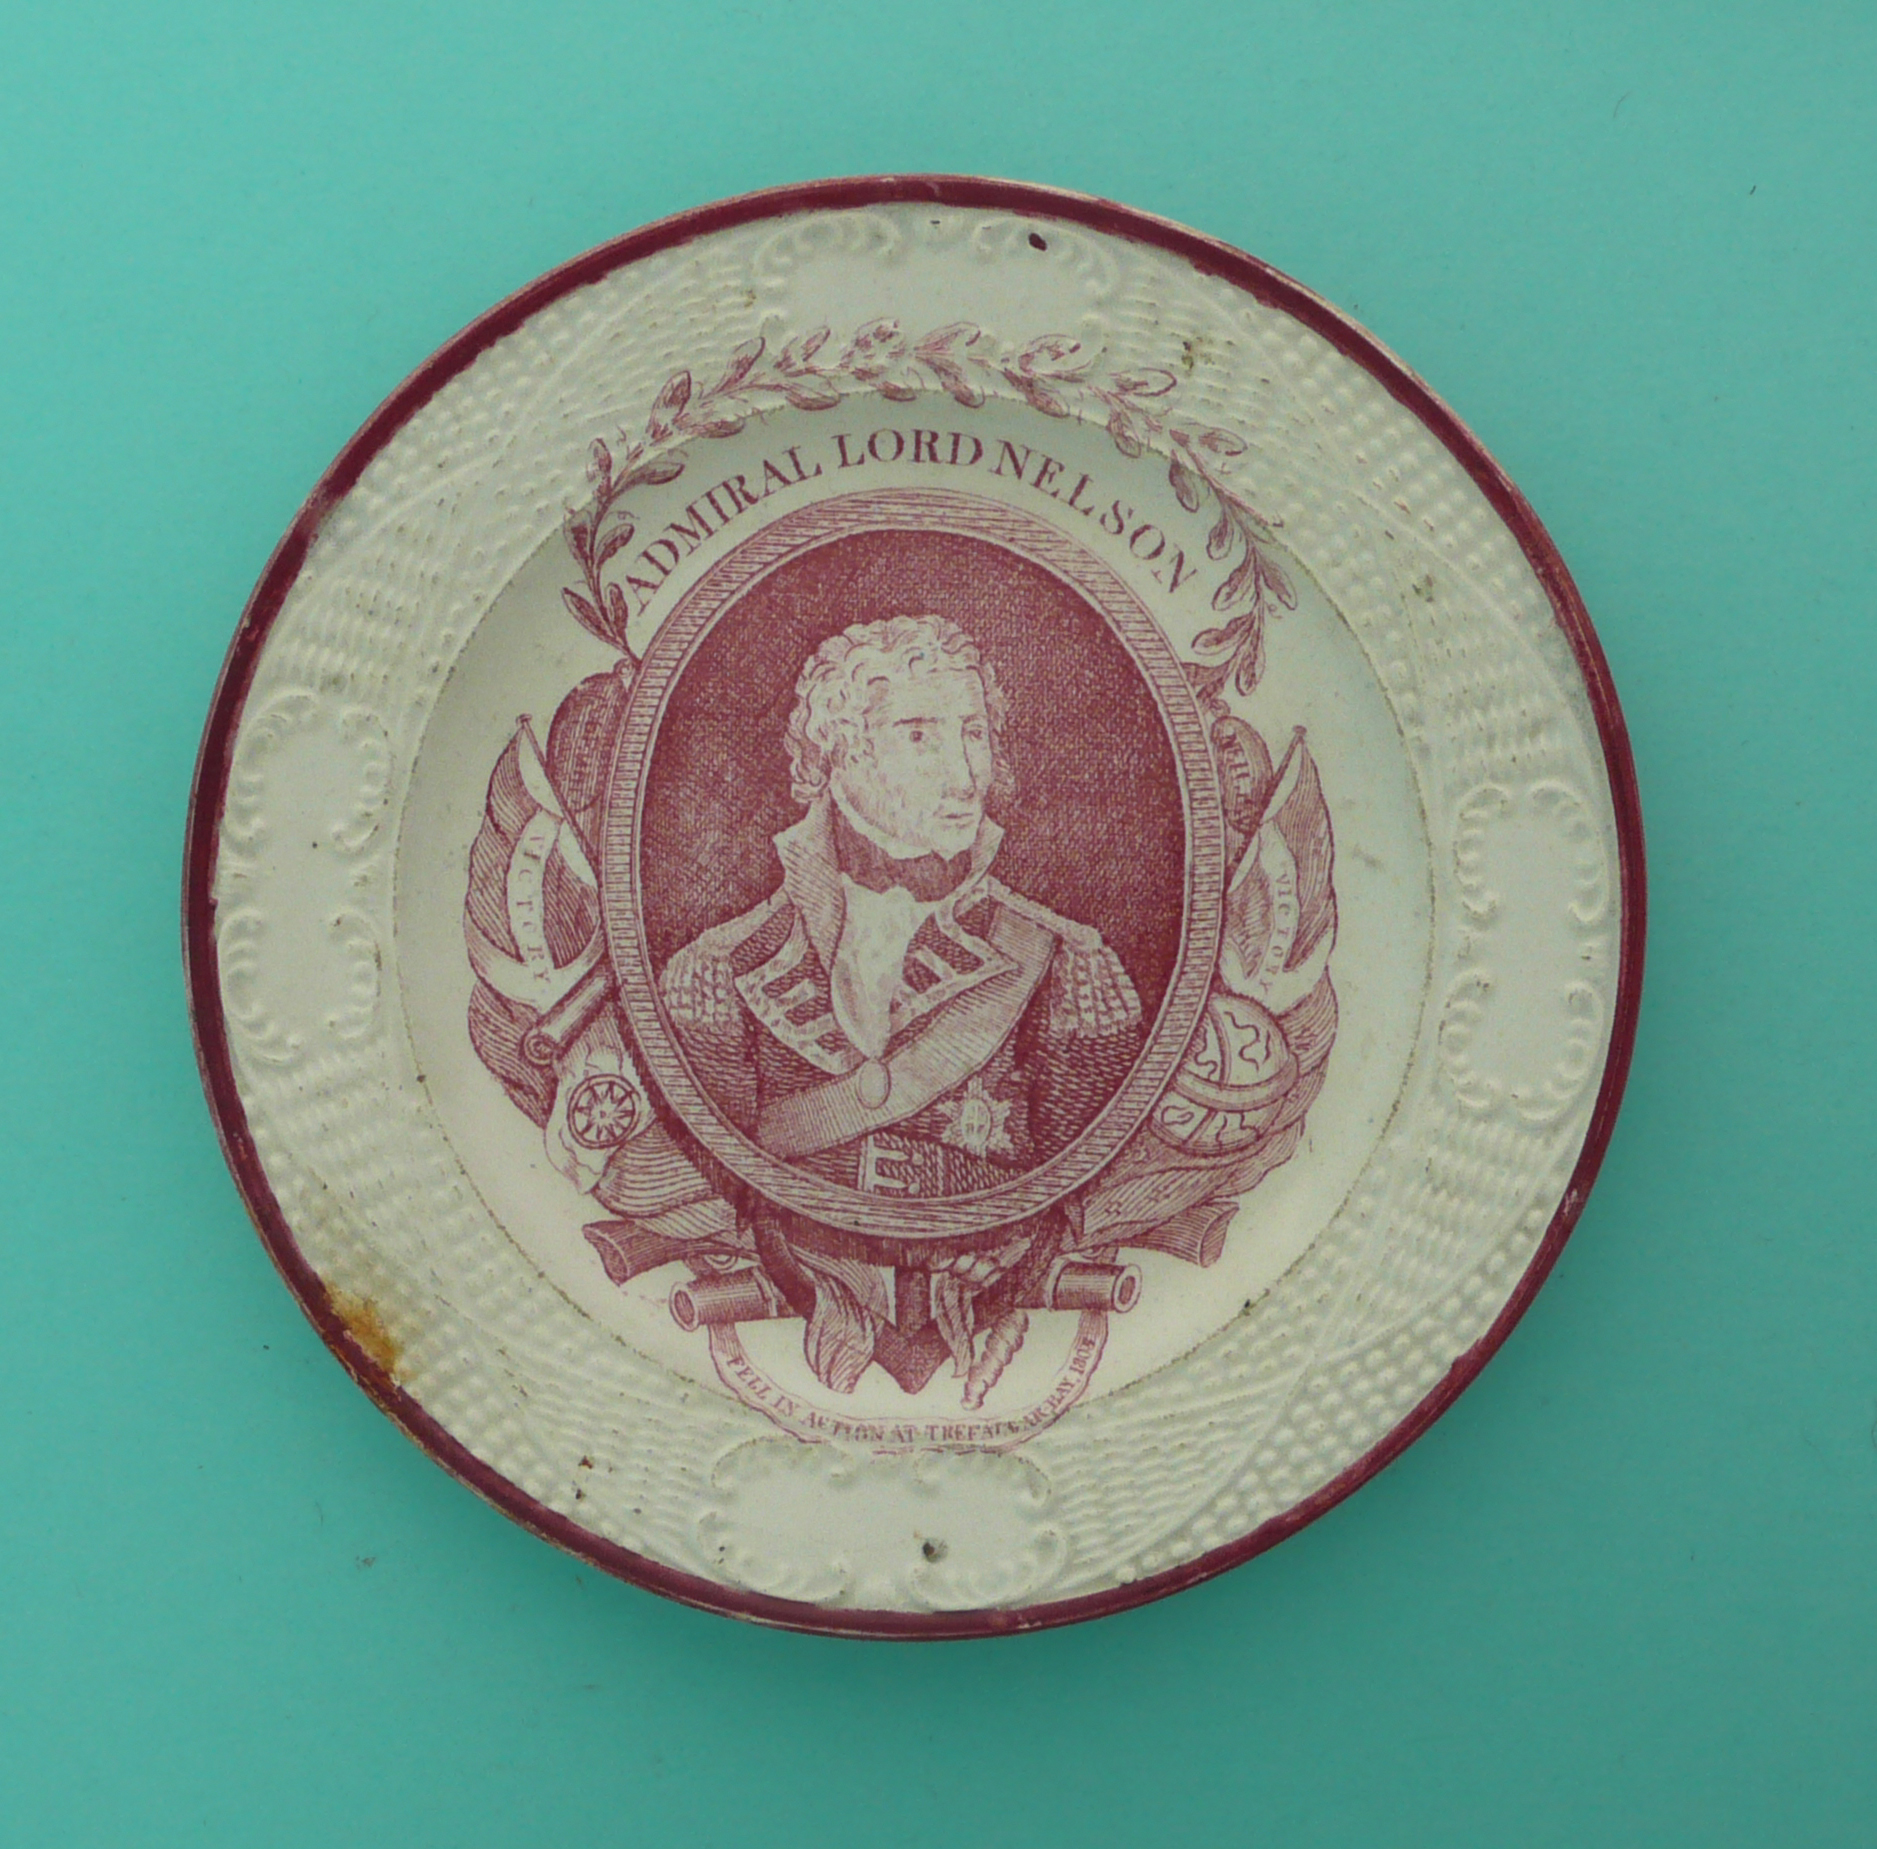 1805 Nelson in Memoriam: an unusual nursery plate with moulded border printed in pink with a named